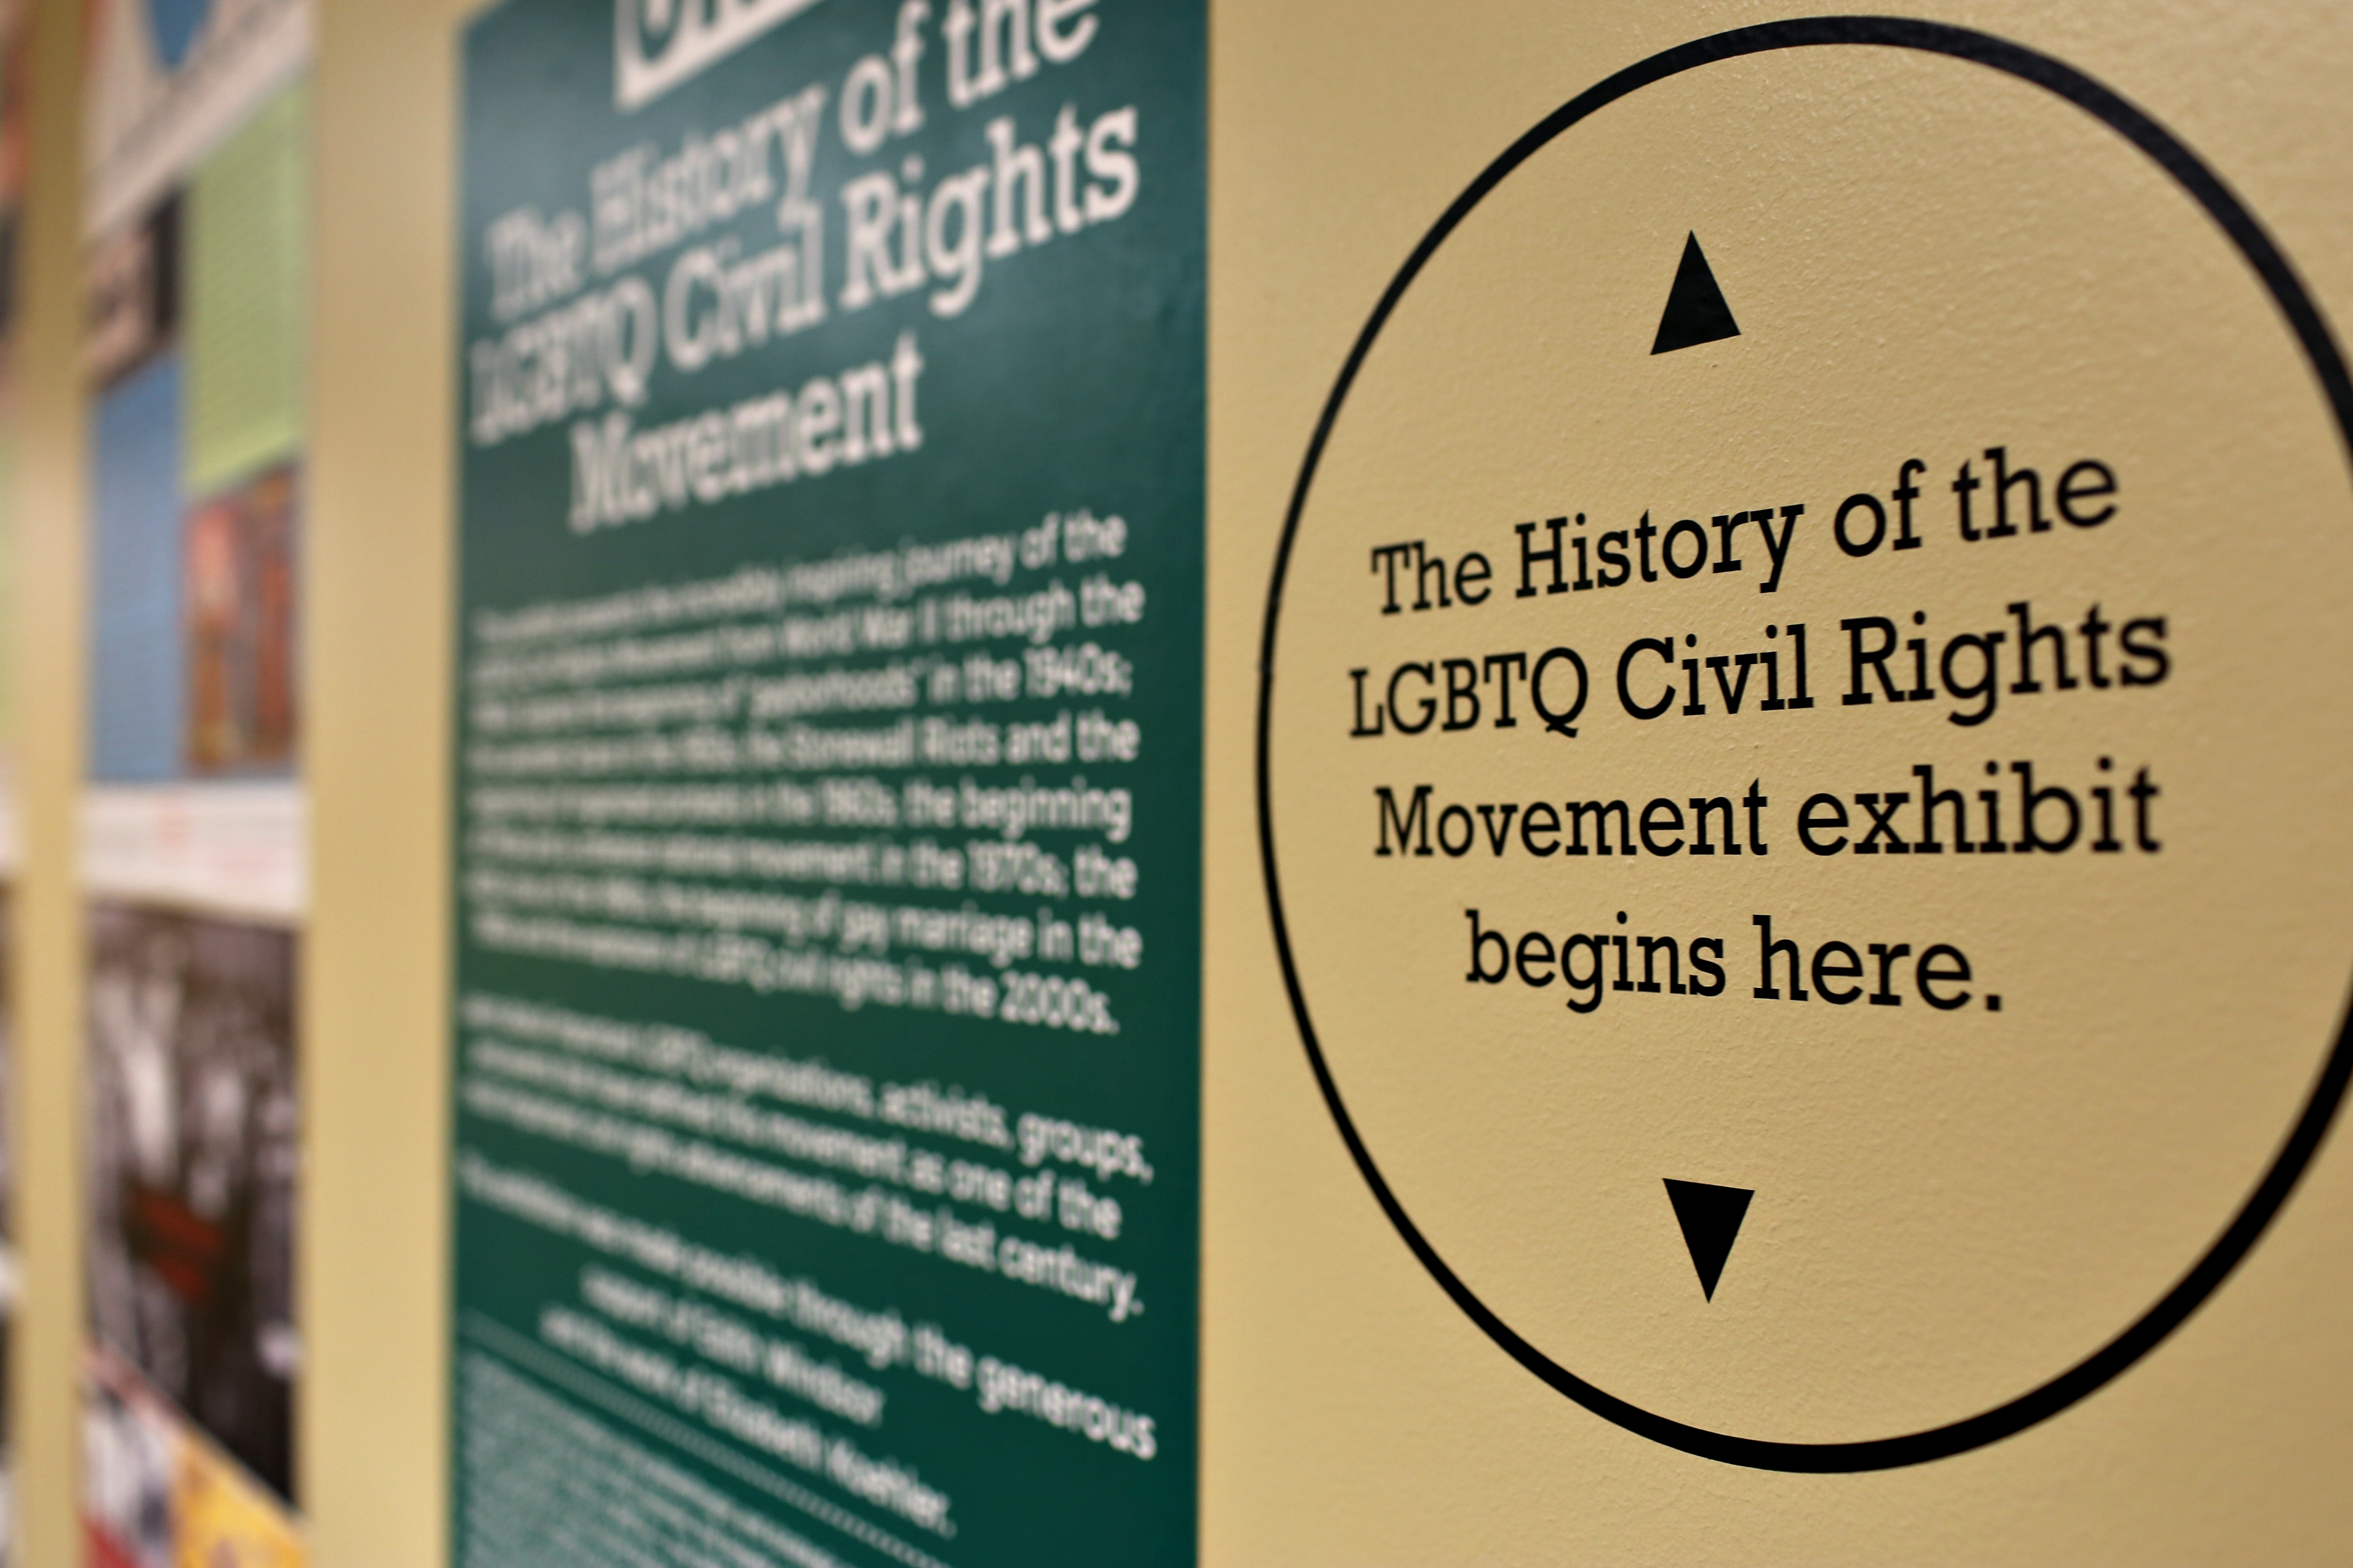 Photograph of a directional sign reading "The History of the LGBTQ Civil Rights Movement exhibit begins here"